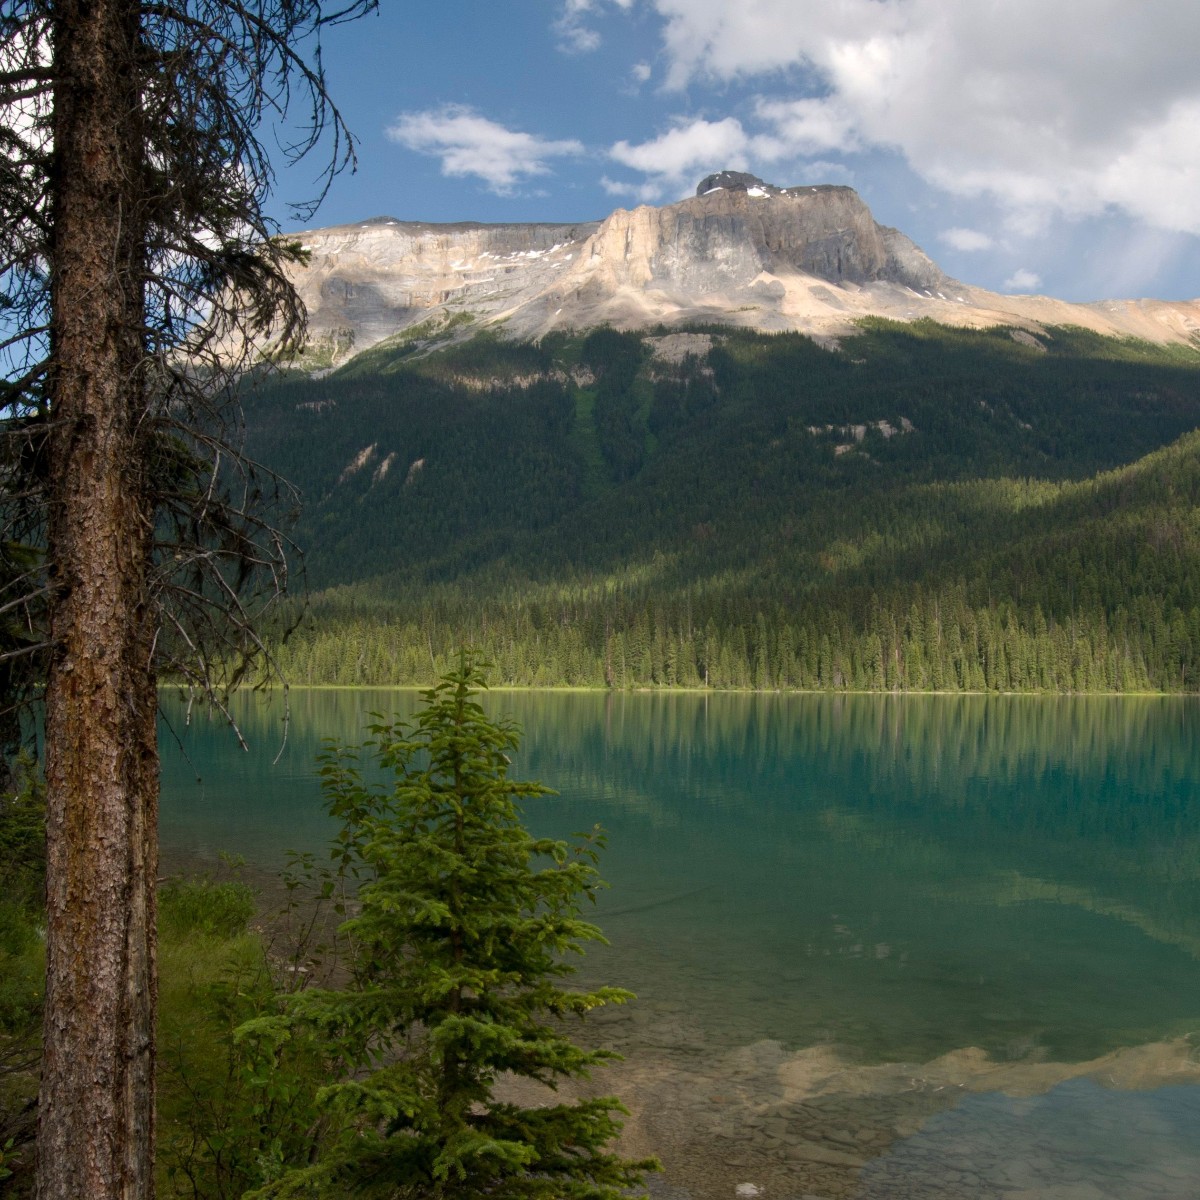 Did you know that the Canadian Rockies are a @unescowhc? Visit the Burgess Shale fossil site and discover the wonders of nature on this magnificent site adorned with mountain peaks, glaciers, and lakes along the @TCTrail! Explore the area on our map here: brnw.ch/21wJ91o